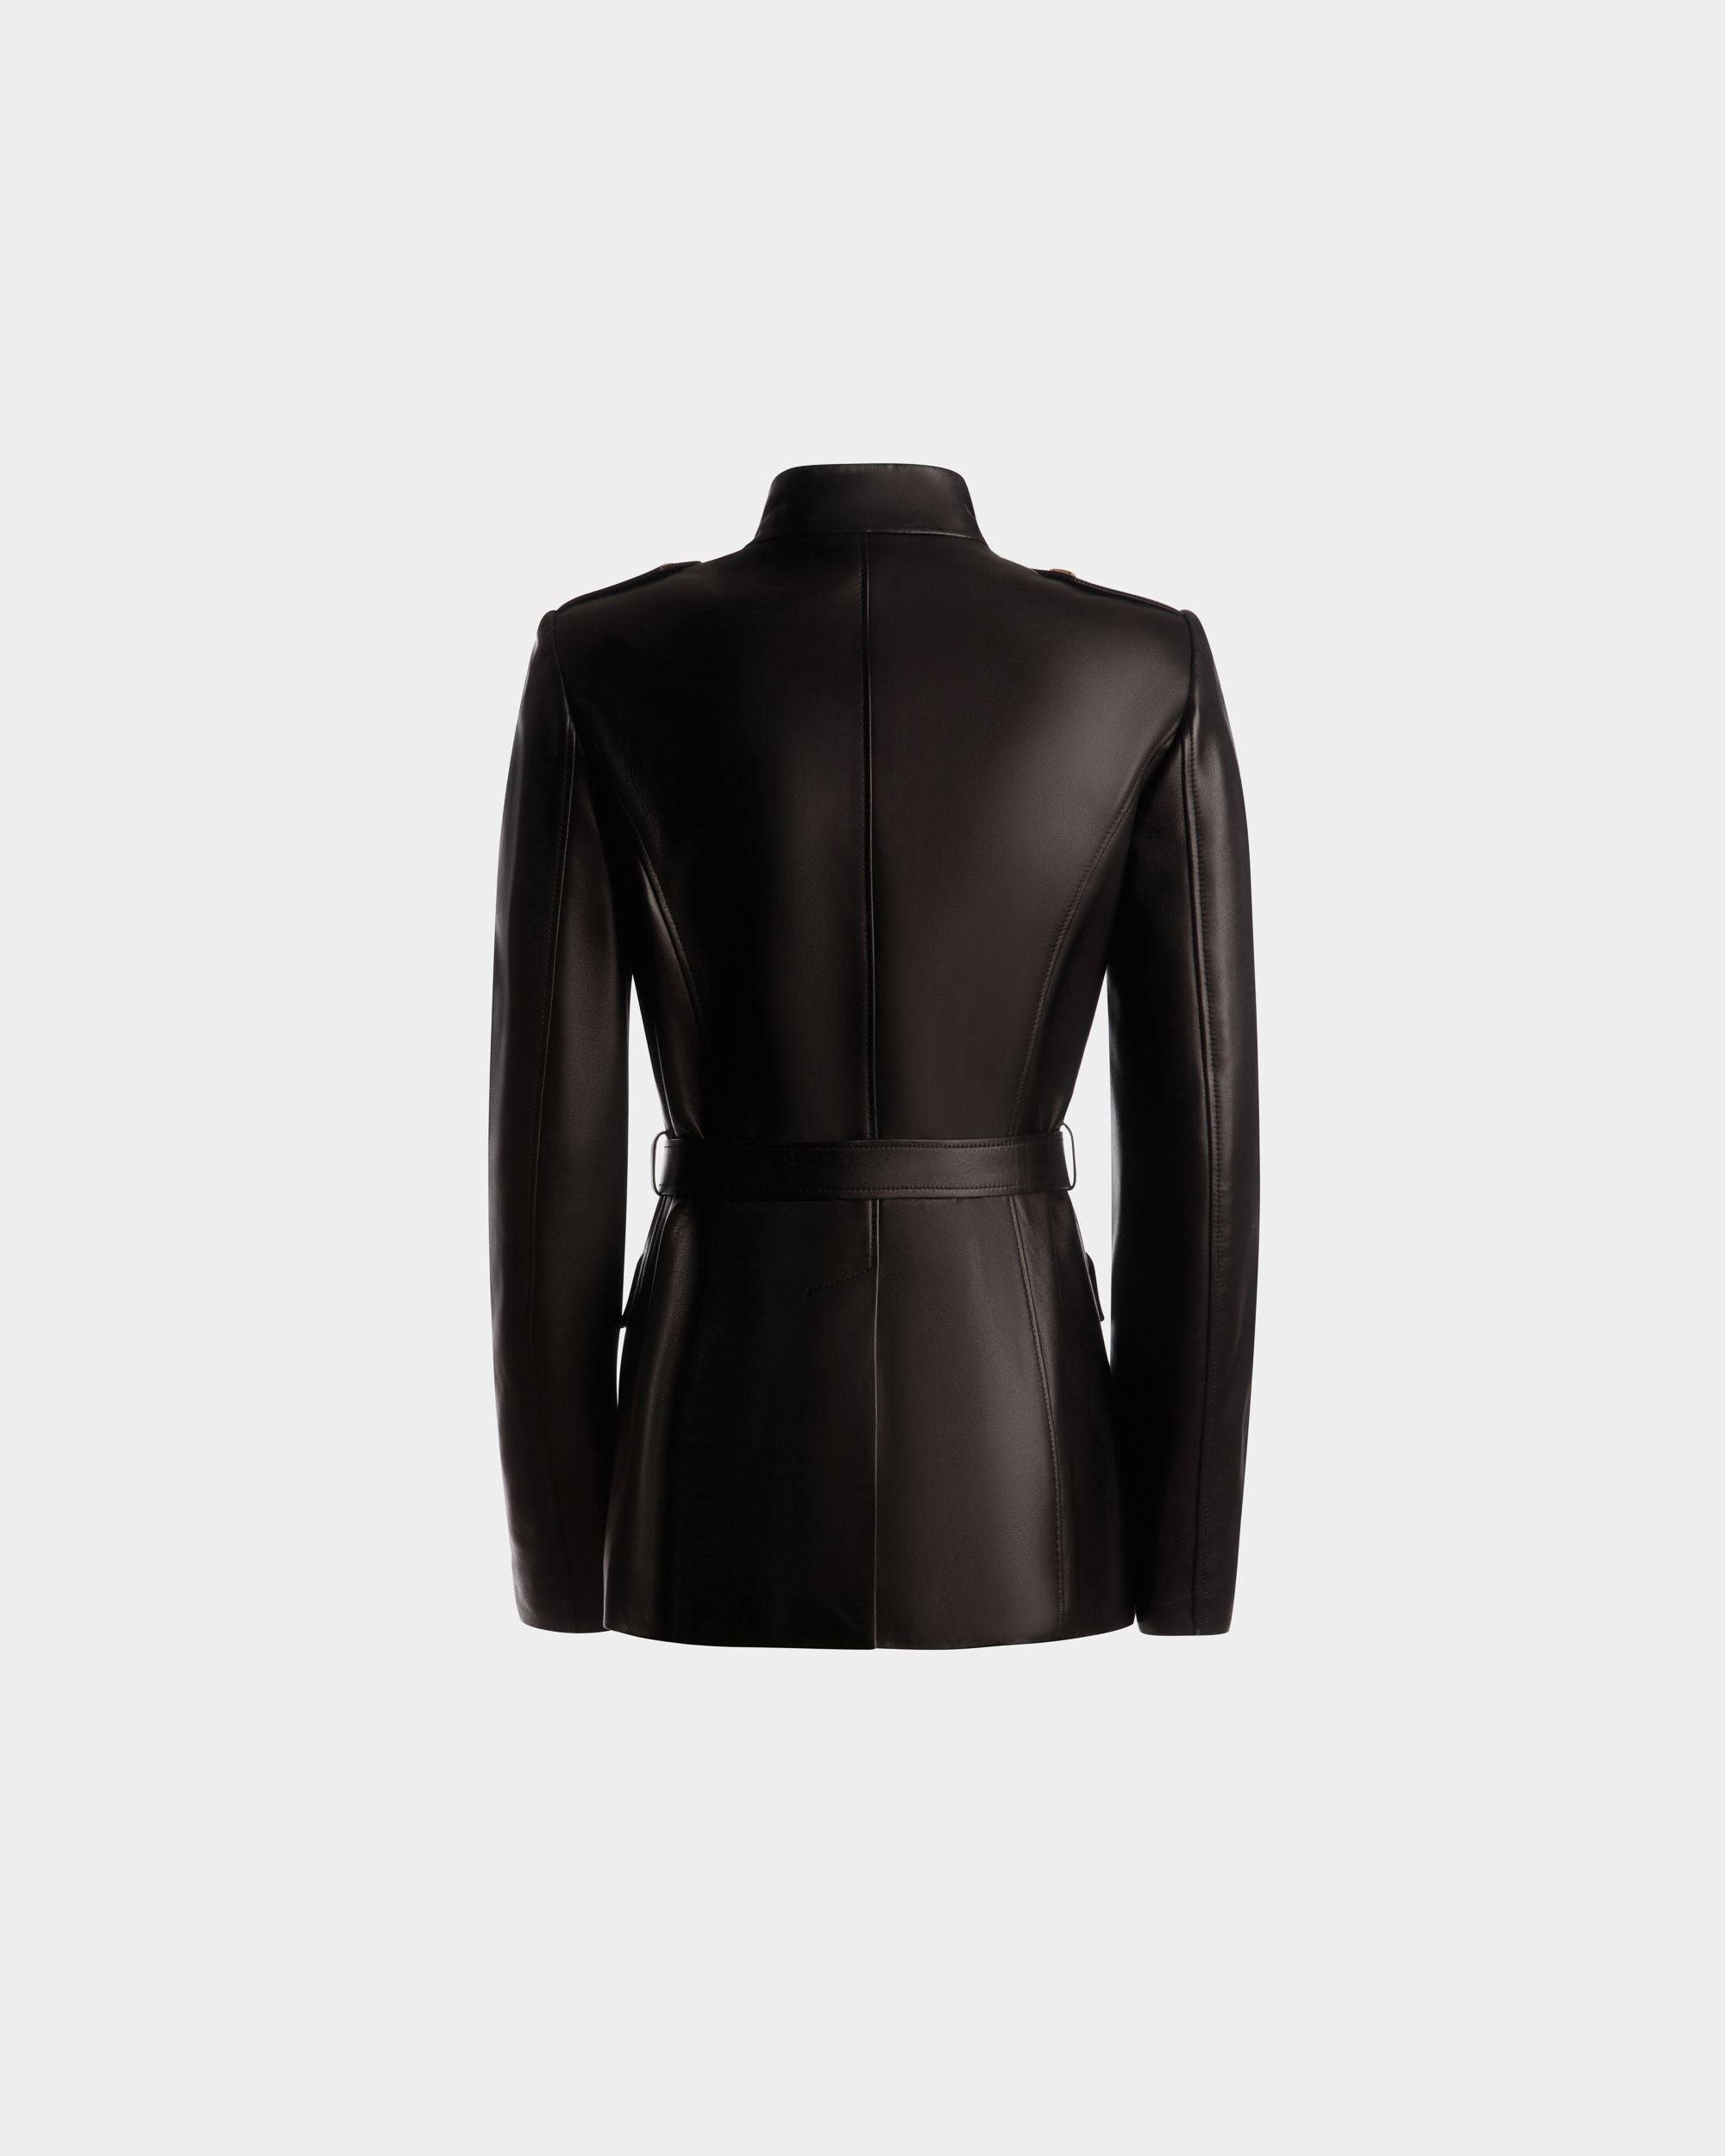 Belted Jacket | Women's Outerwear | Black Leather | Bally | Still Life Back